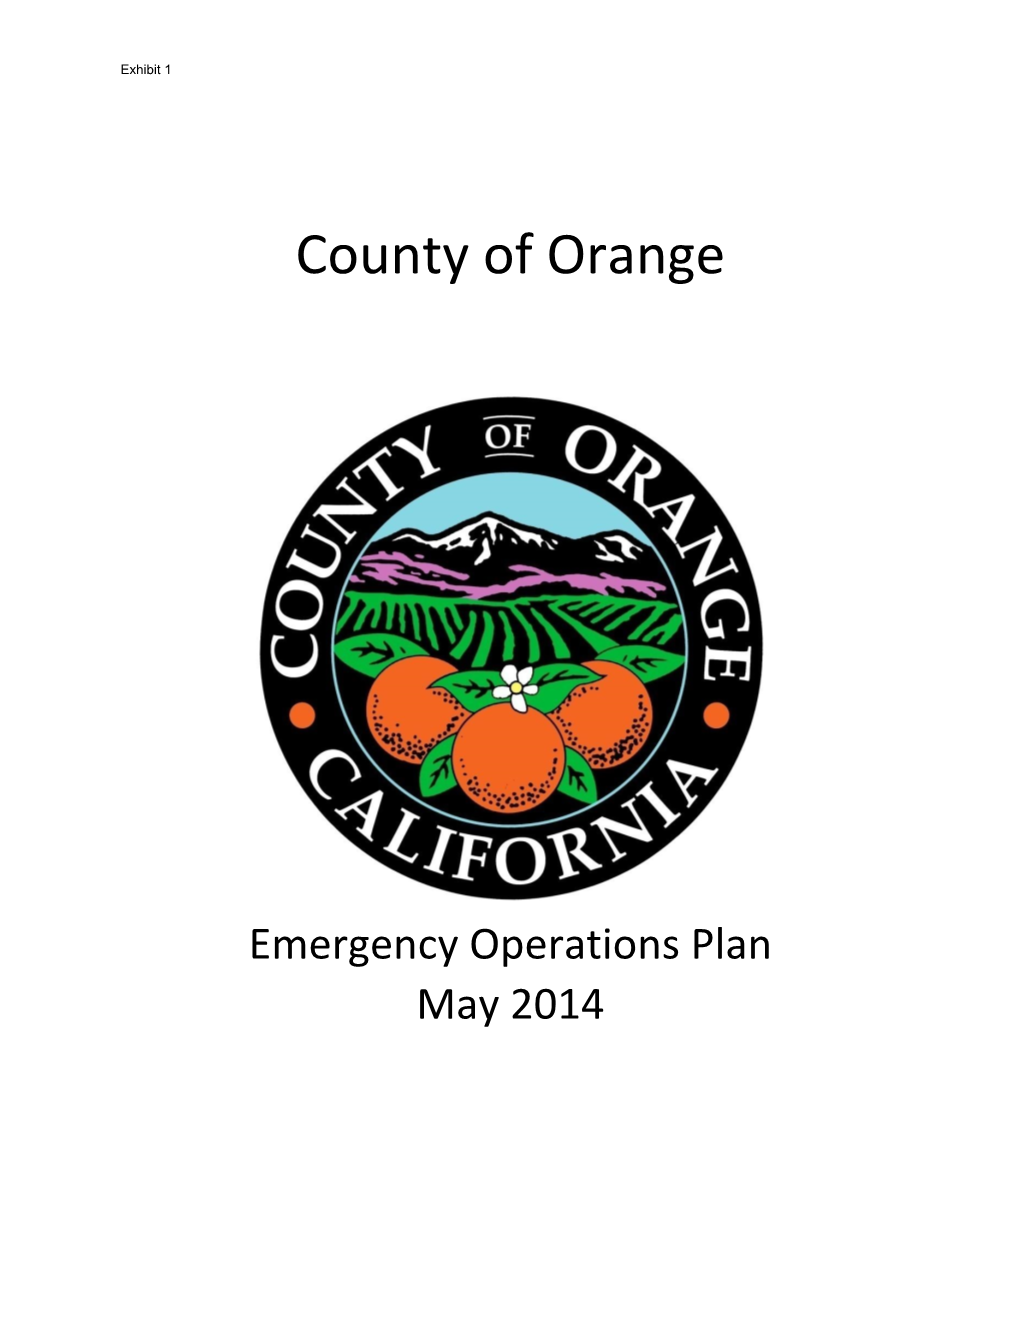 County of Orange Emergency Operations Plan (EOP) Identifies the County’S Emergency Planning, Organization, Response Policies, and Procedures